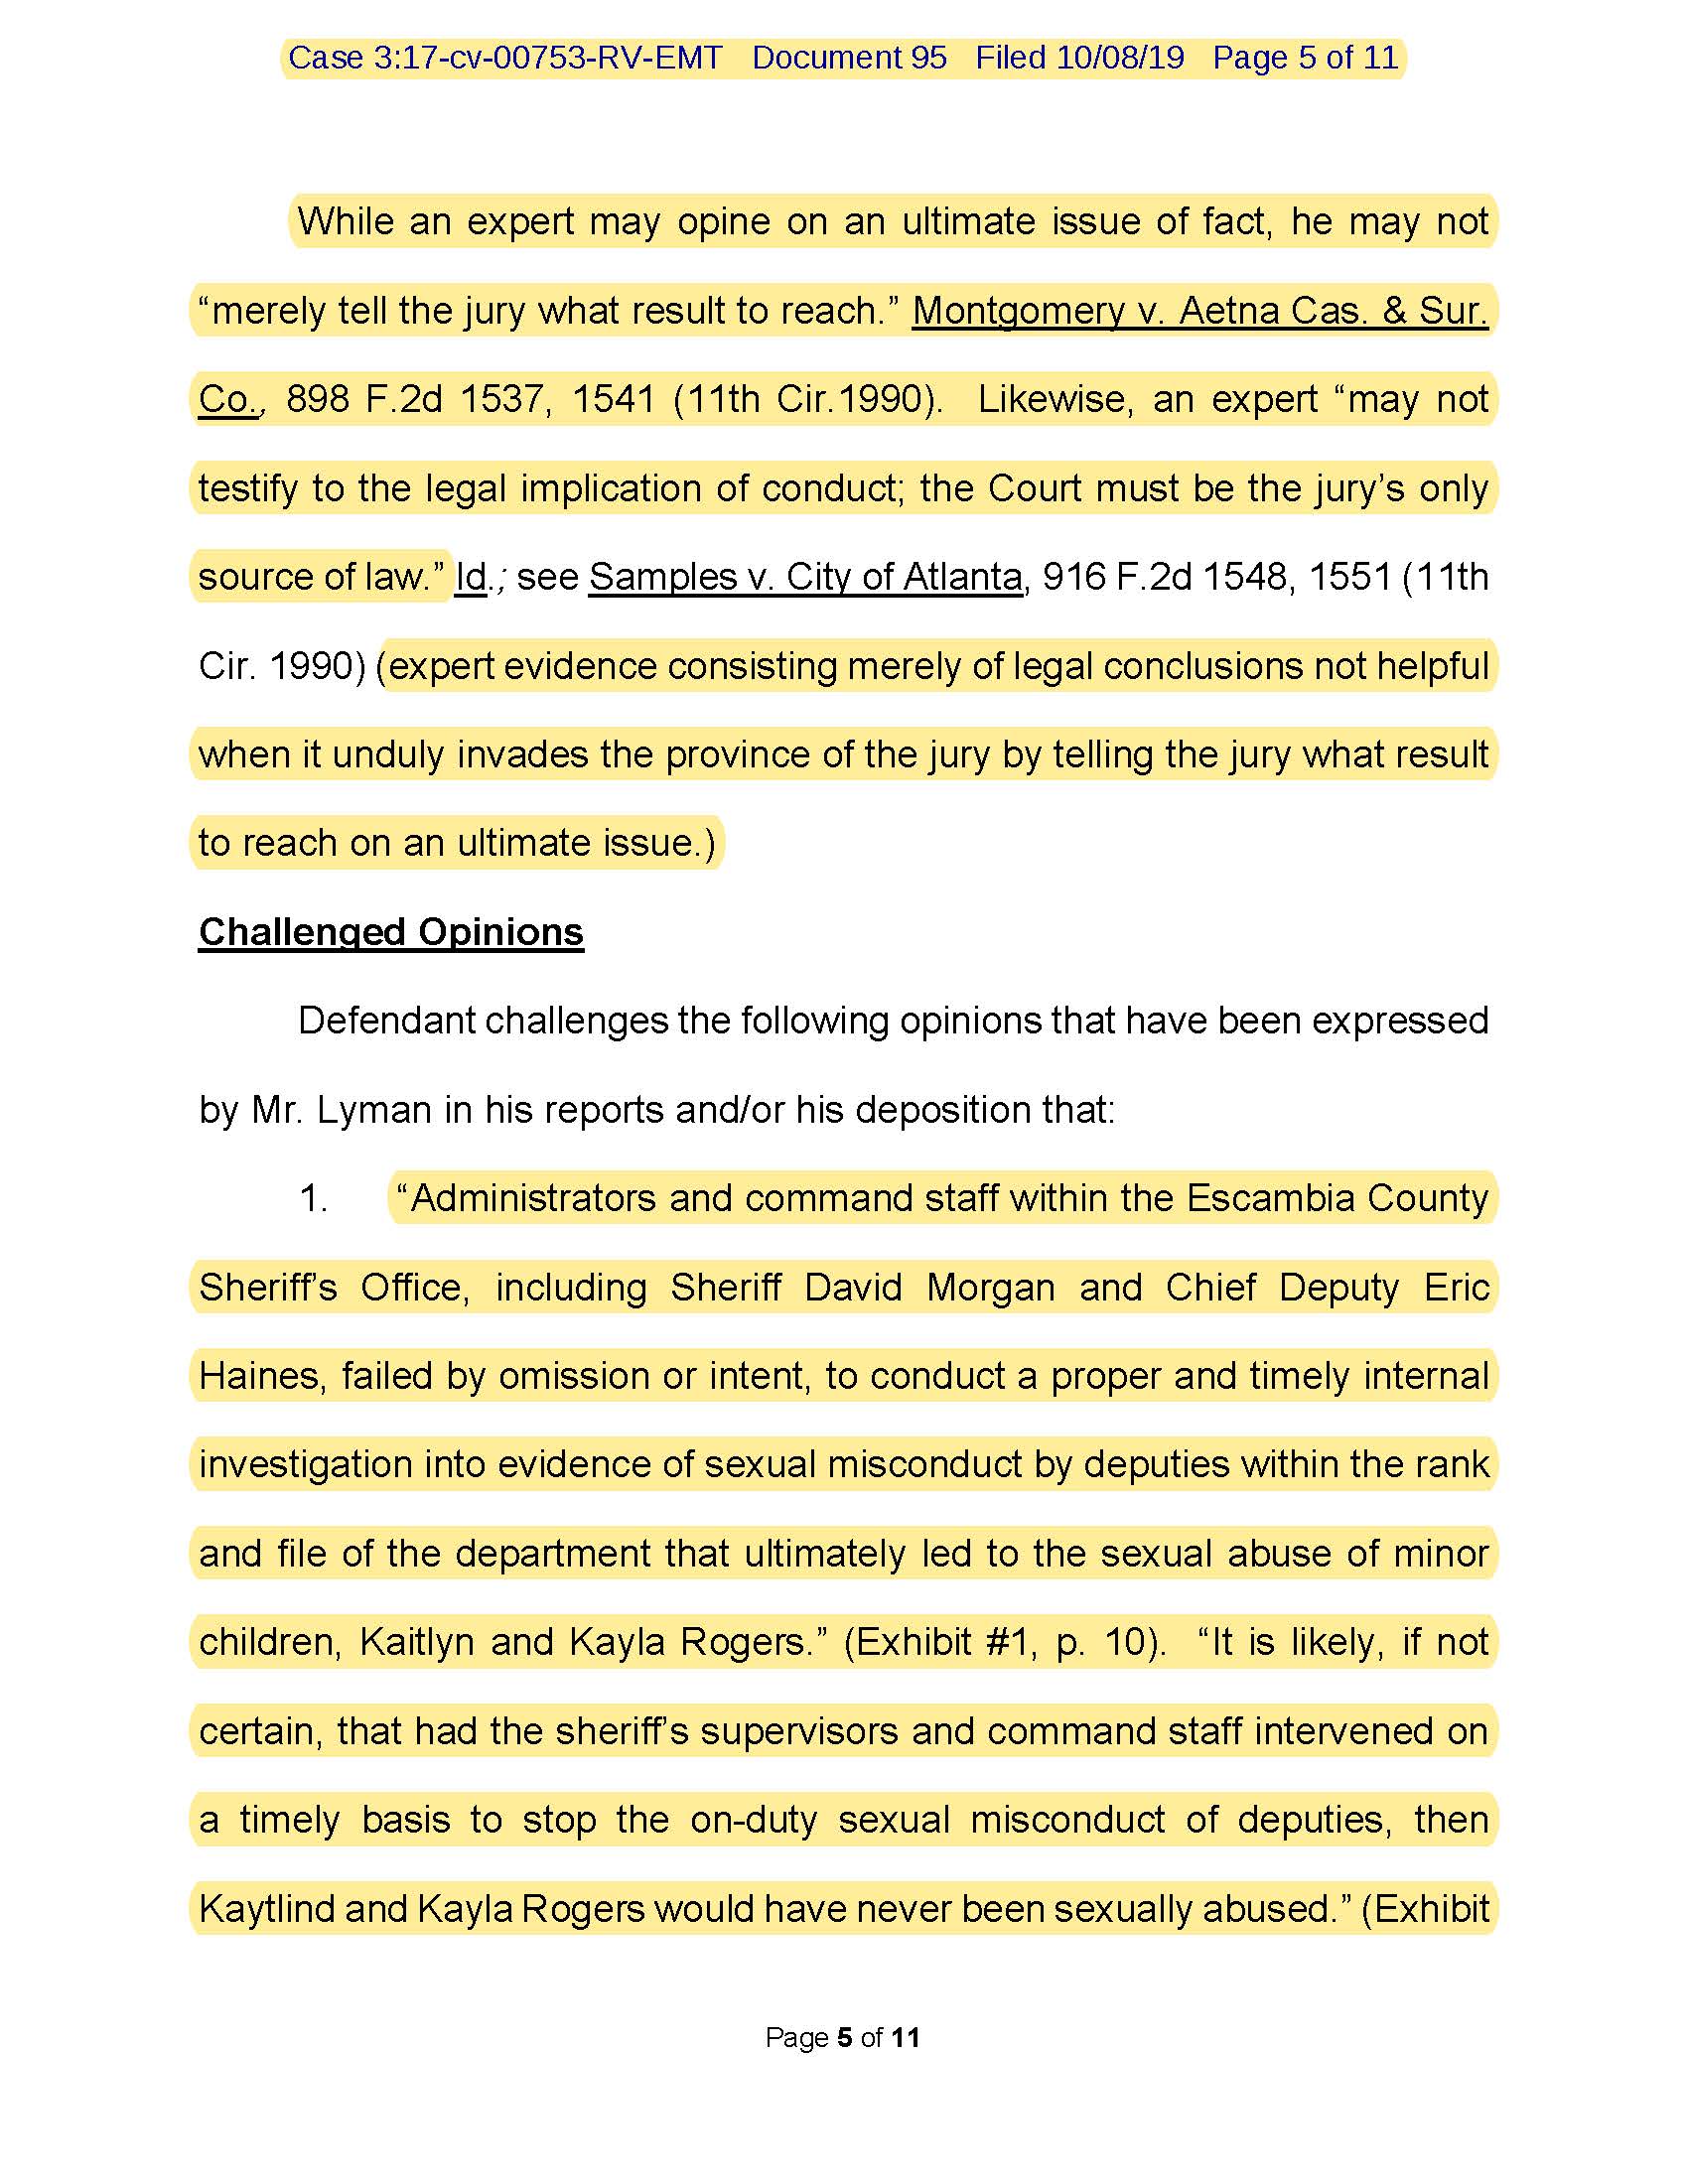 motion to exclude expert testimony_Page_05